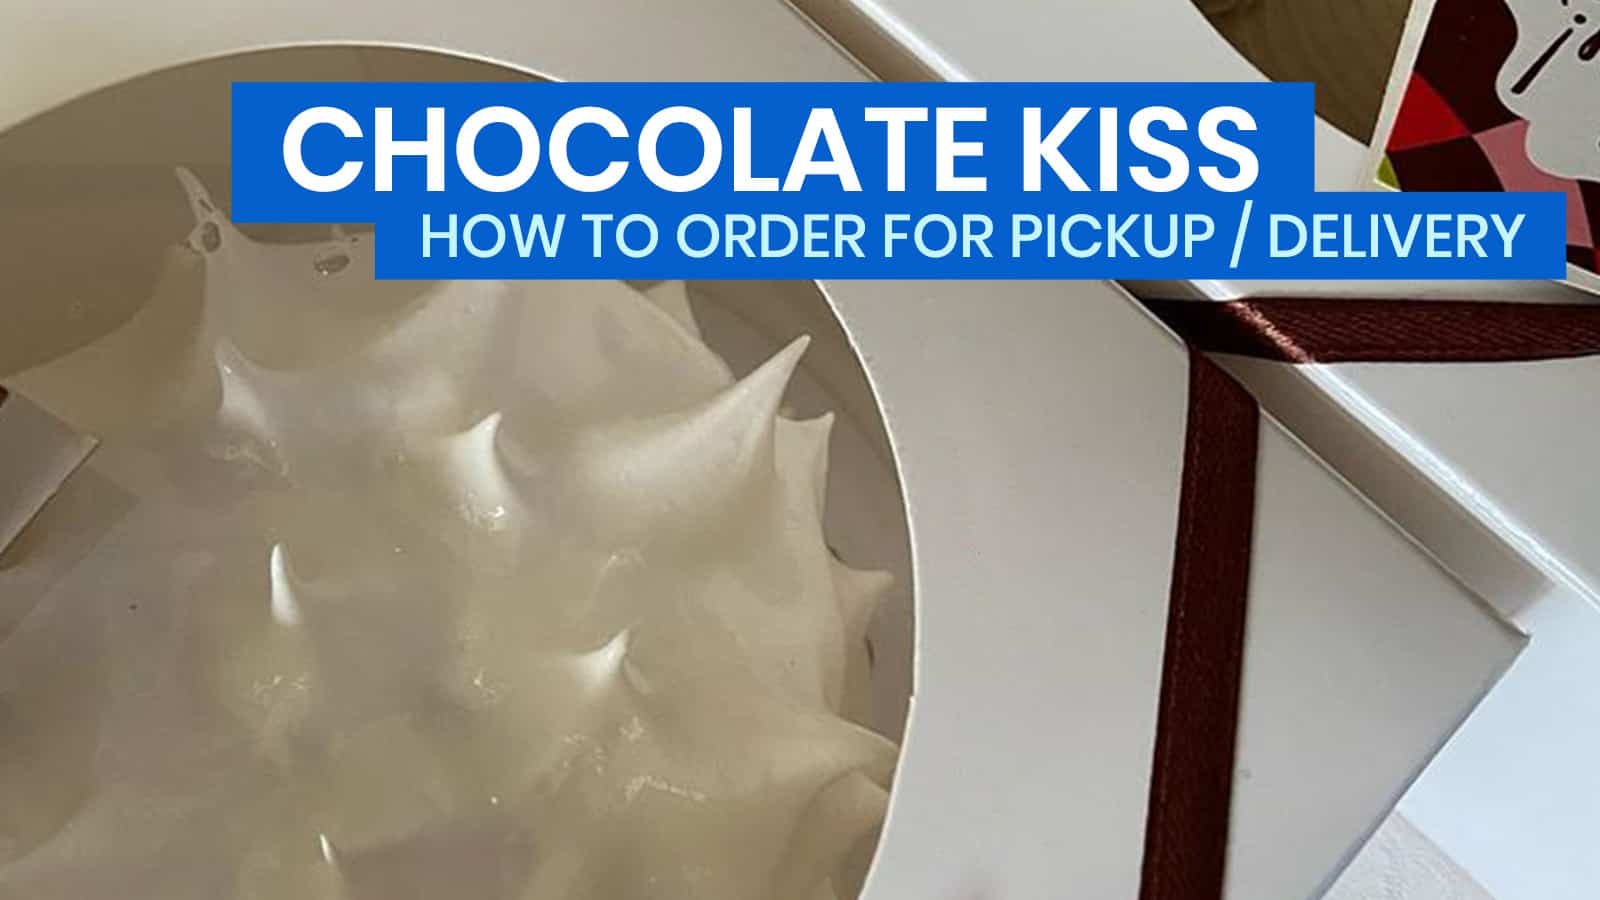 CHOCOLATE KISS CAFE: How to Order Cakes for Pick-up / Delivery